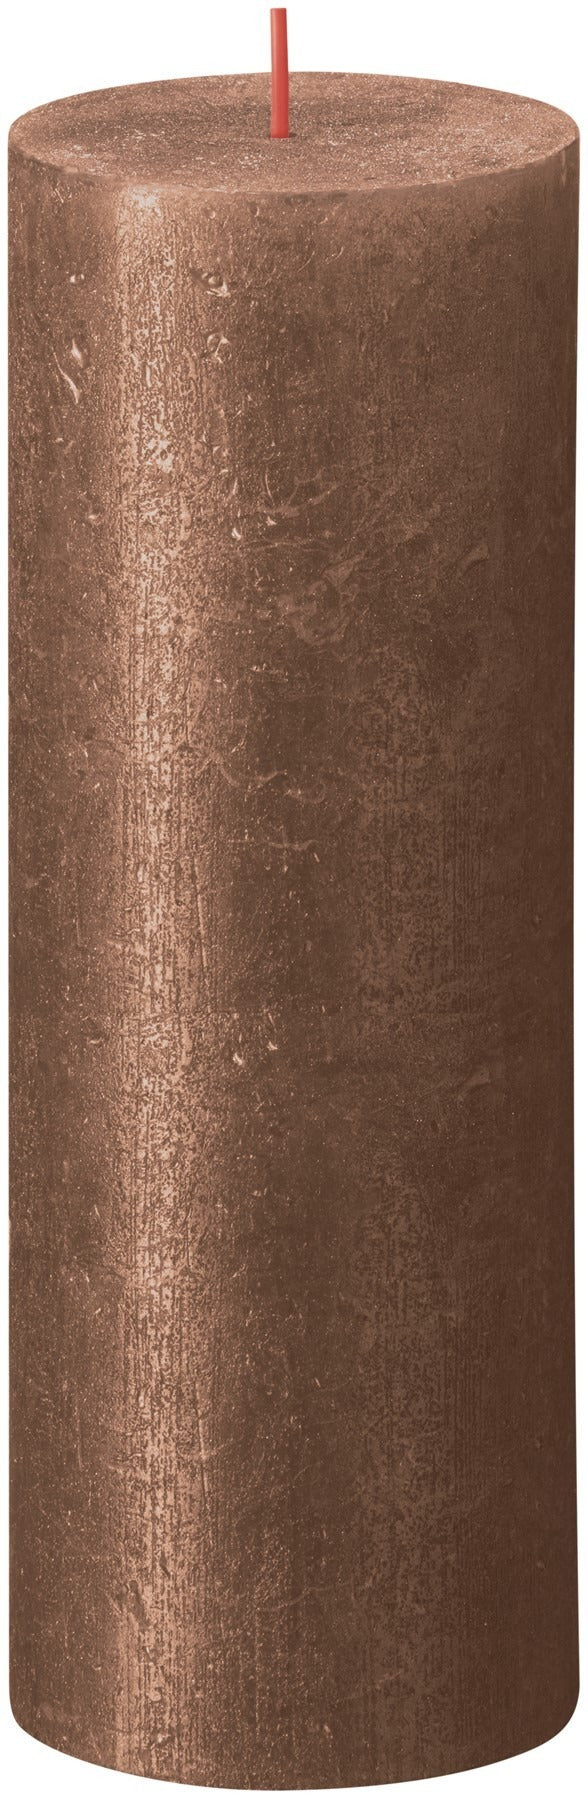 View Copper Bolsius Rustic Shimmer Metallic Candle 190 x 68mm information